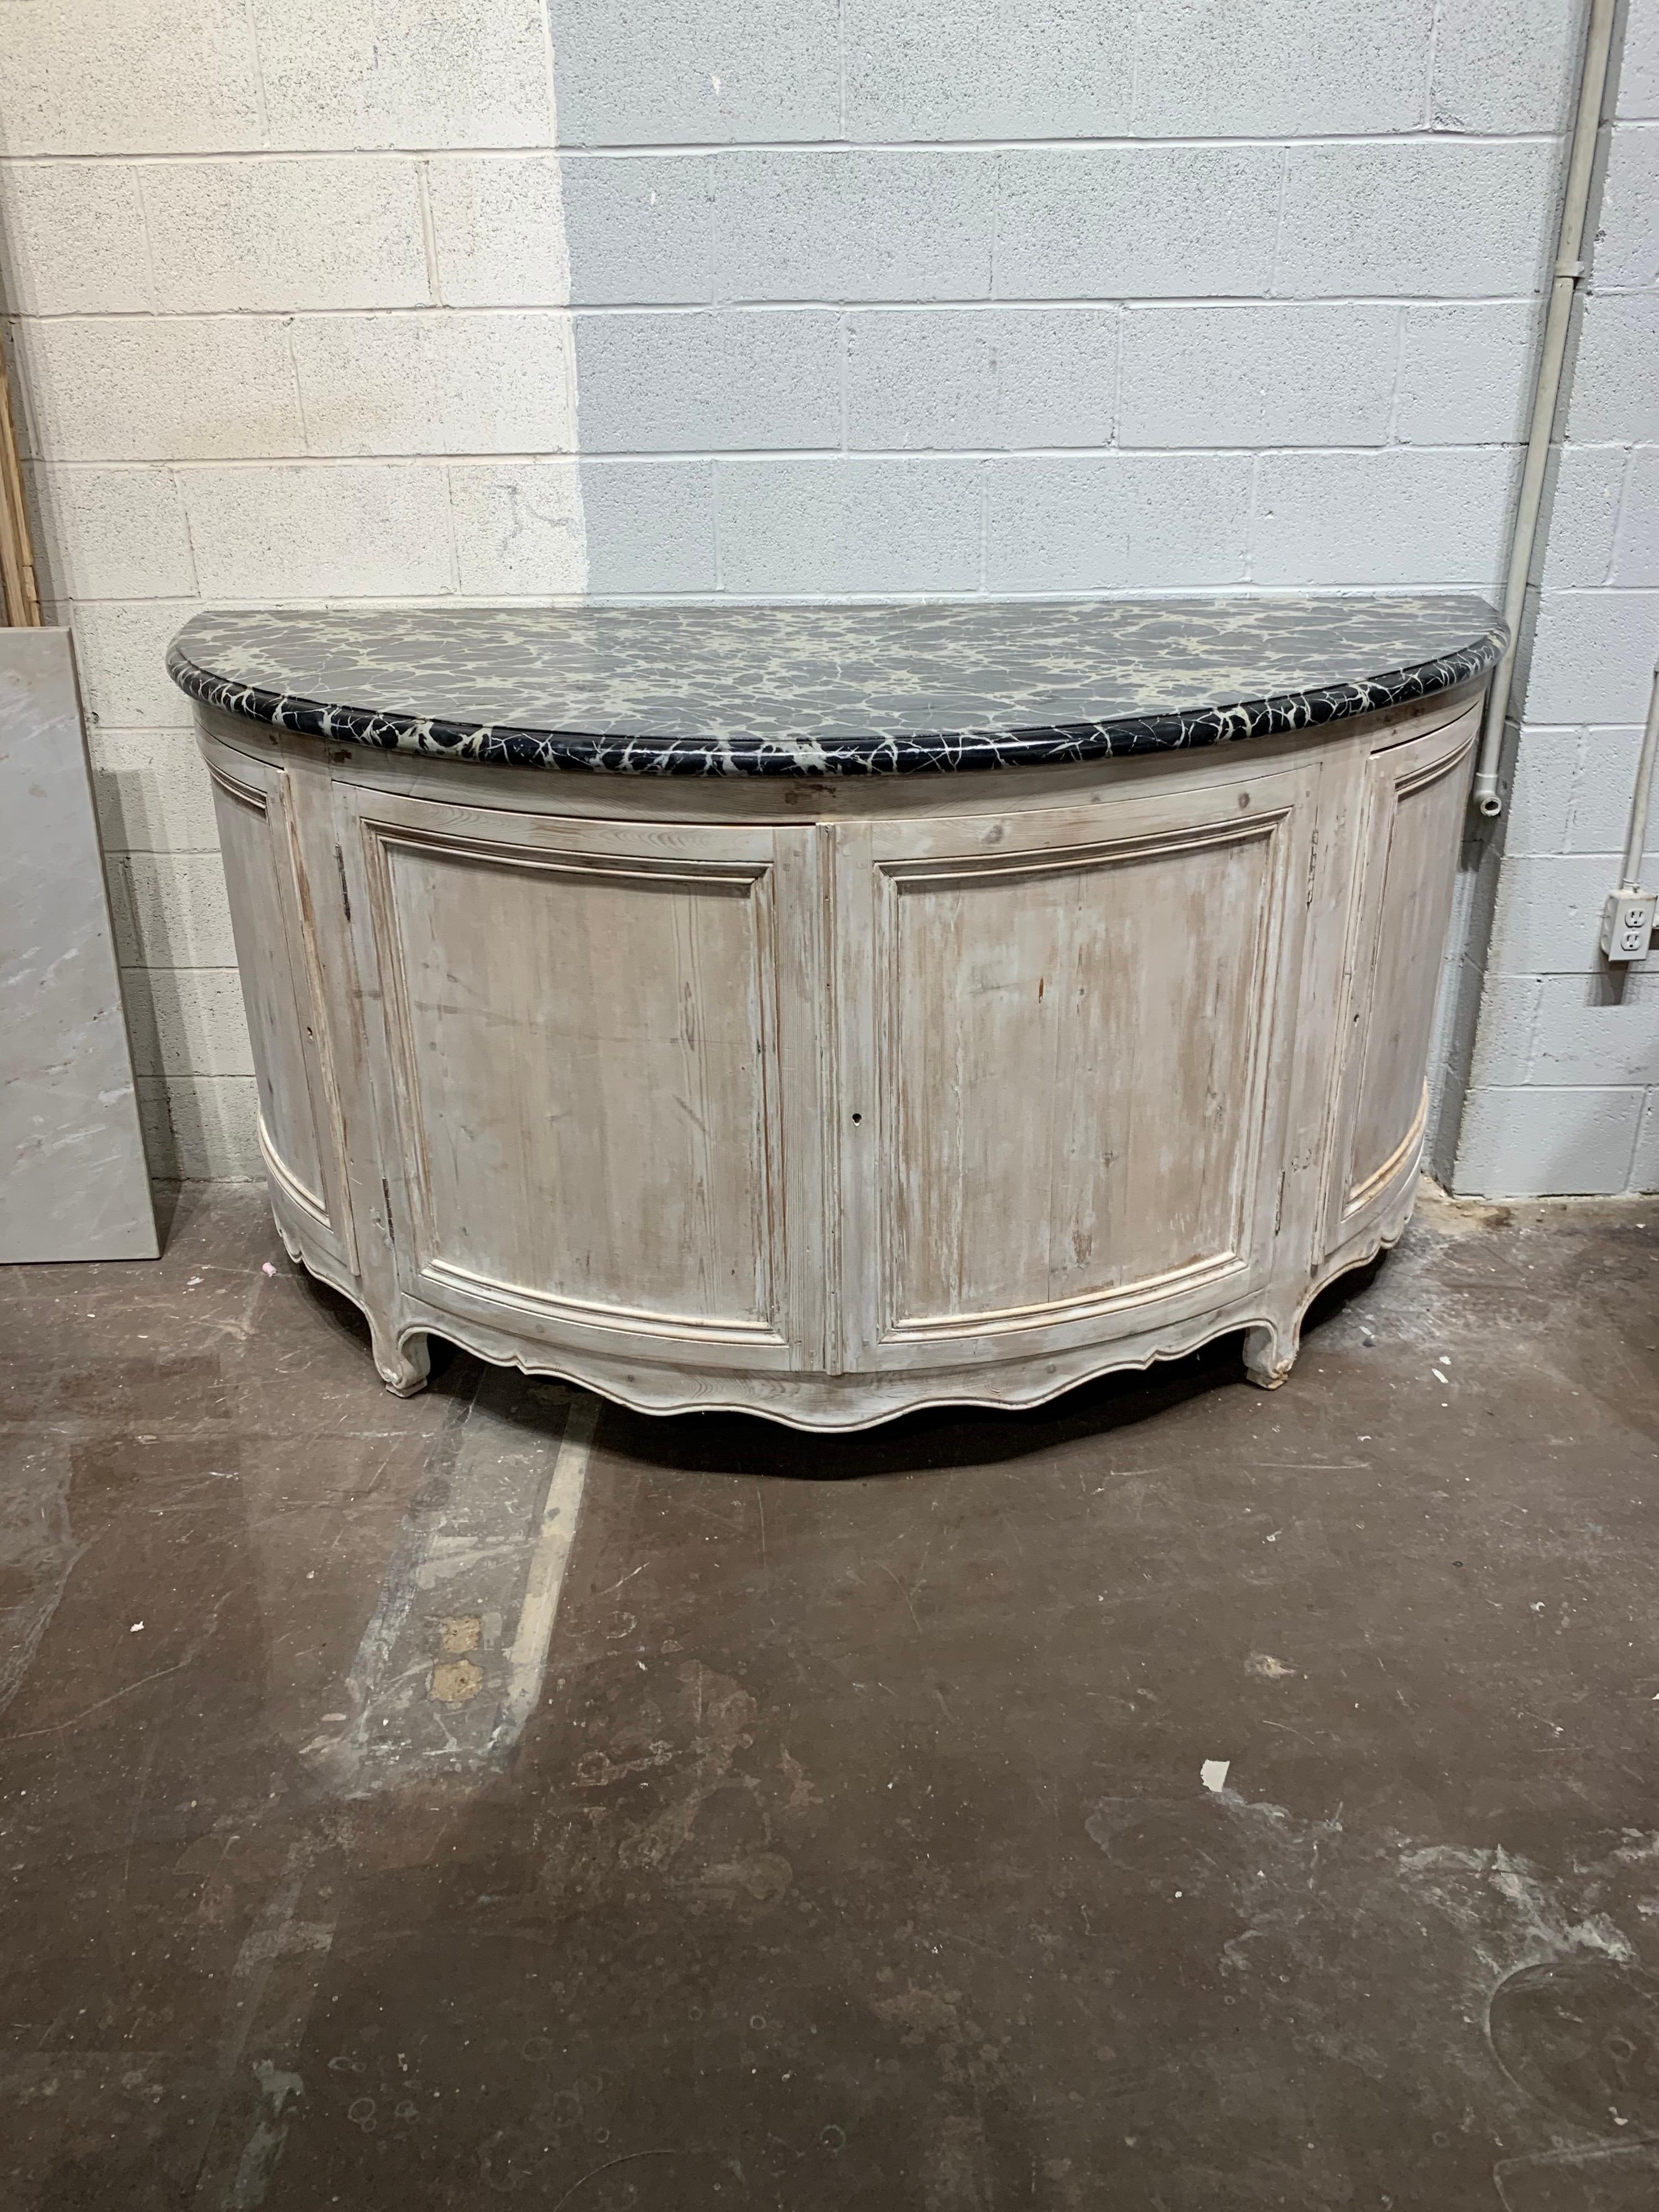 Interesting 19th century French large scale white-washed demi-lune console with faux marble top. Great patina and tons of storage. Nice!